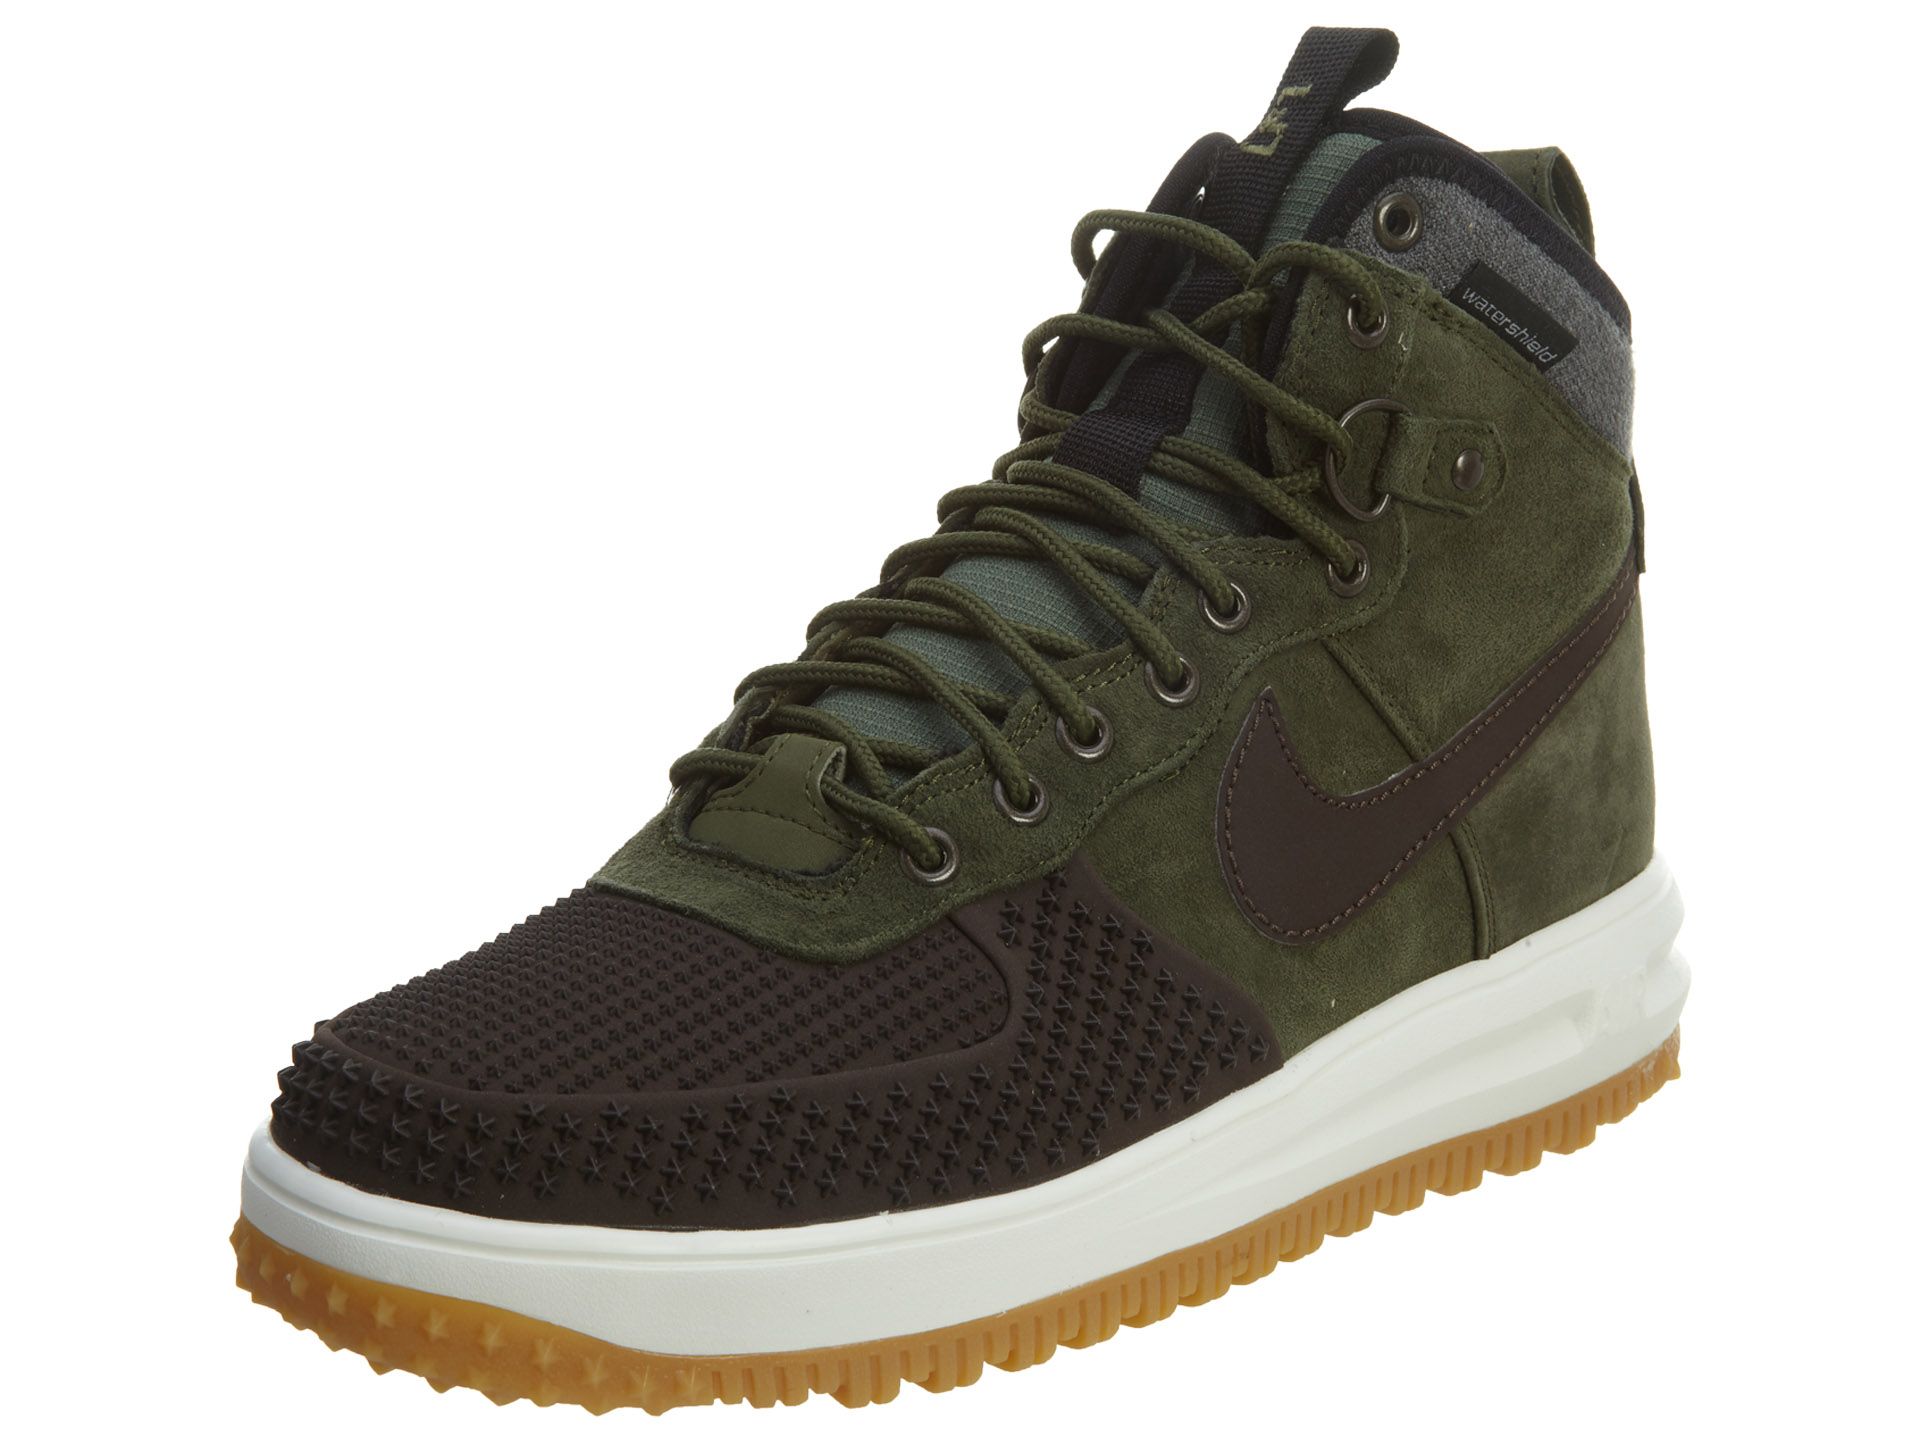 nike lunar force 1 duckboot baroque brown army olive